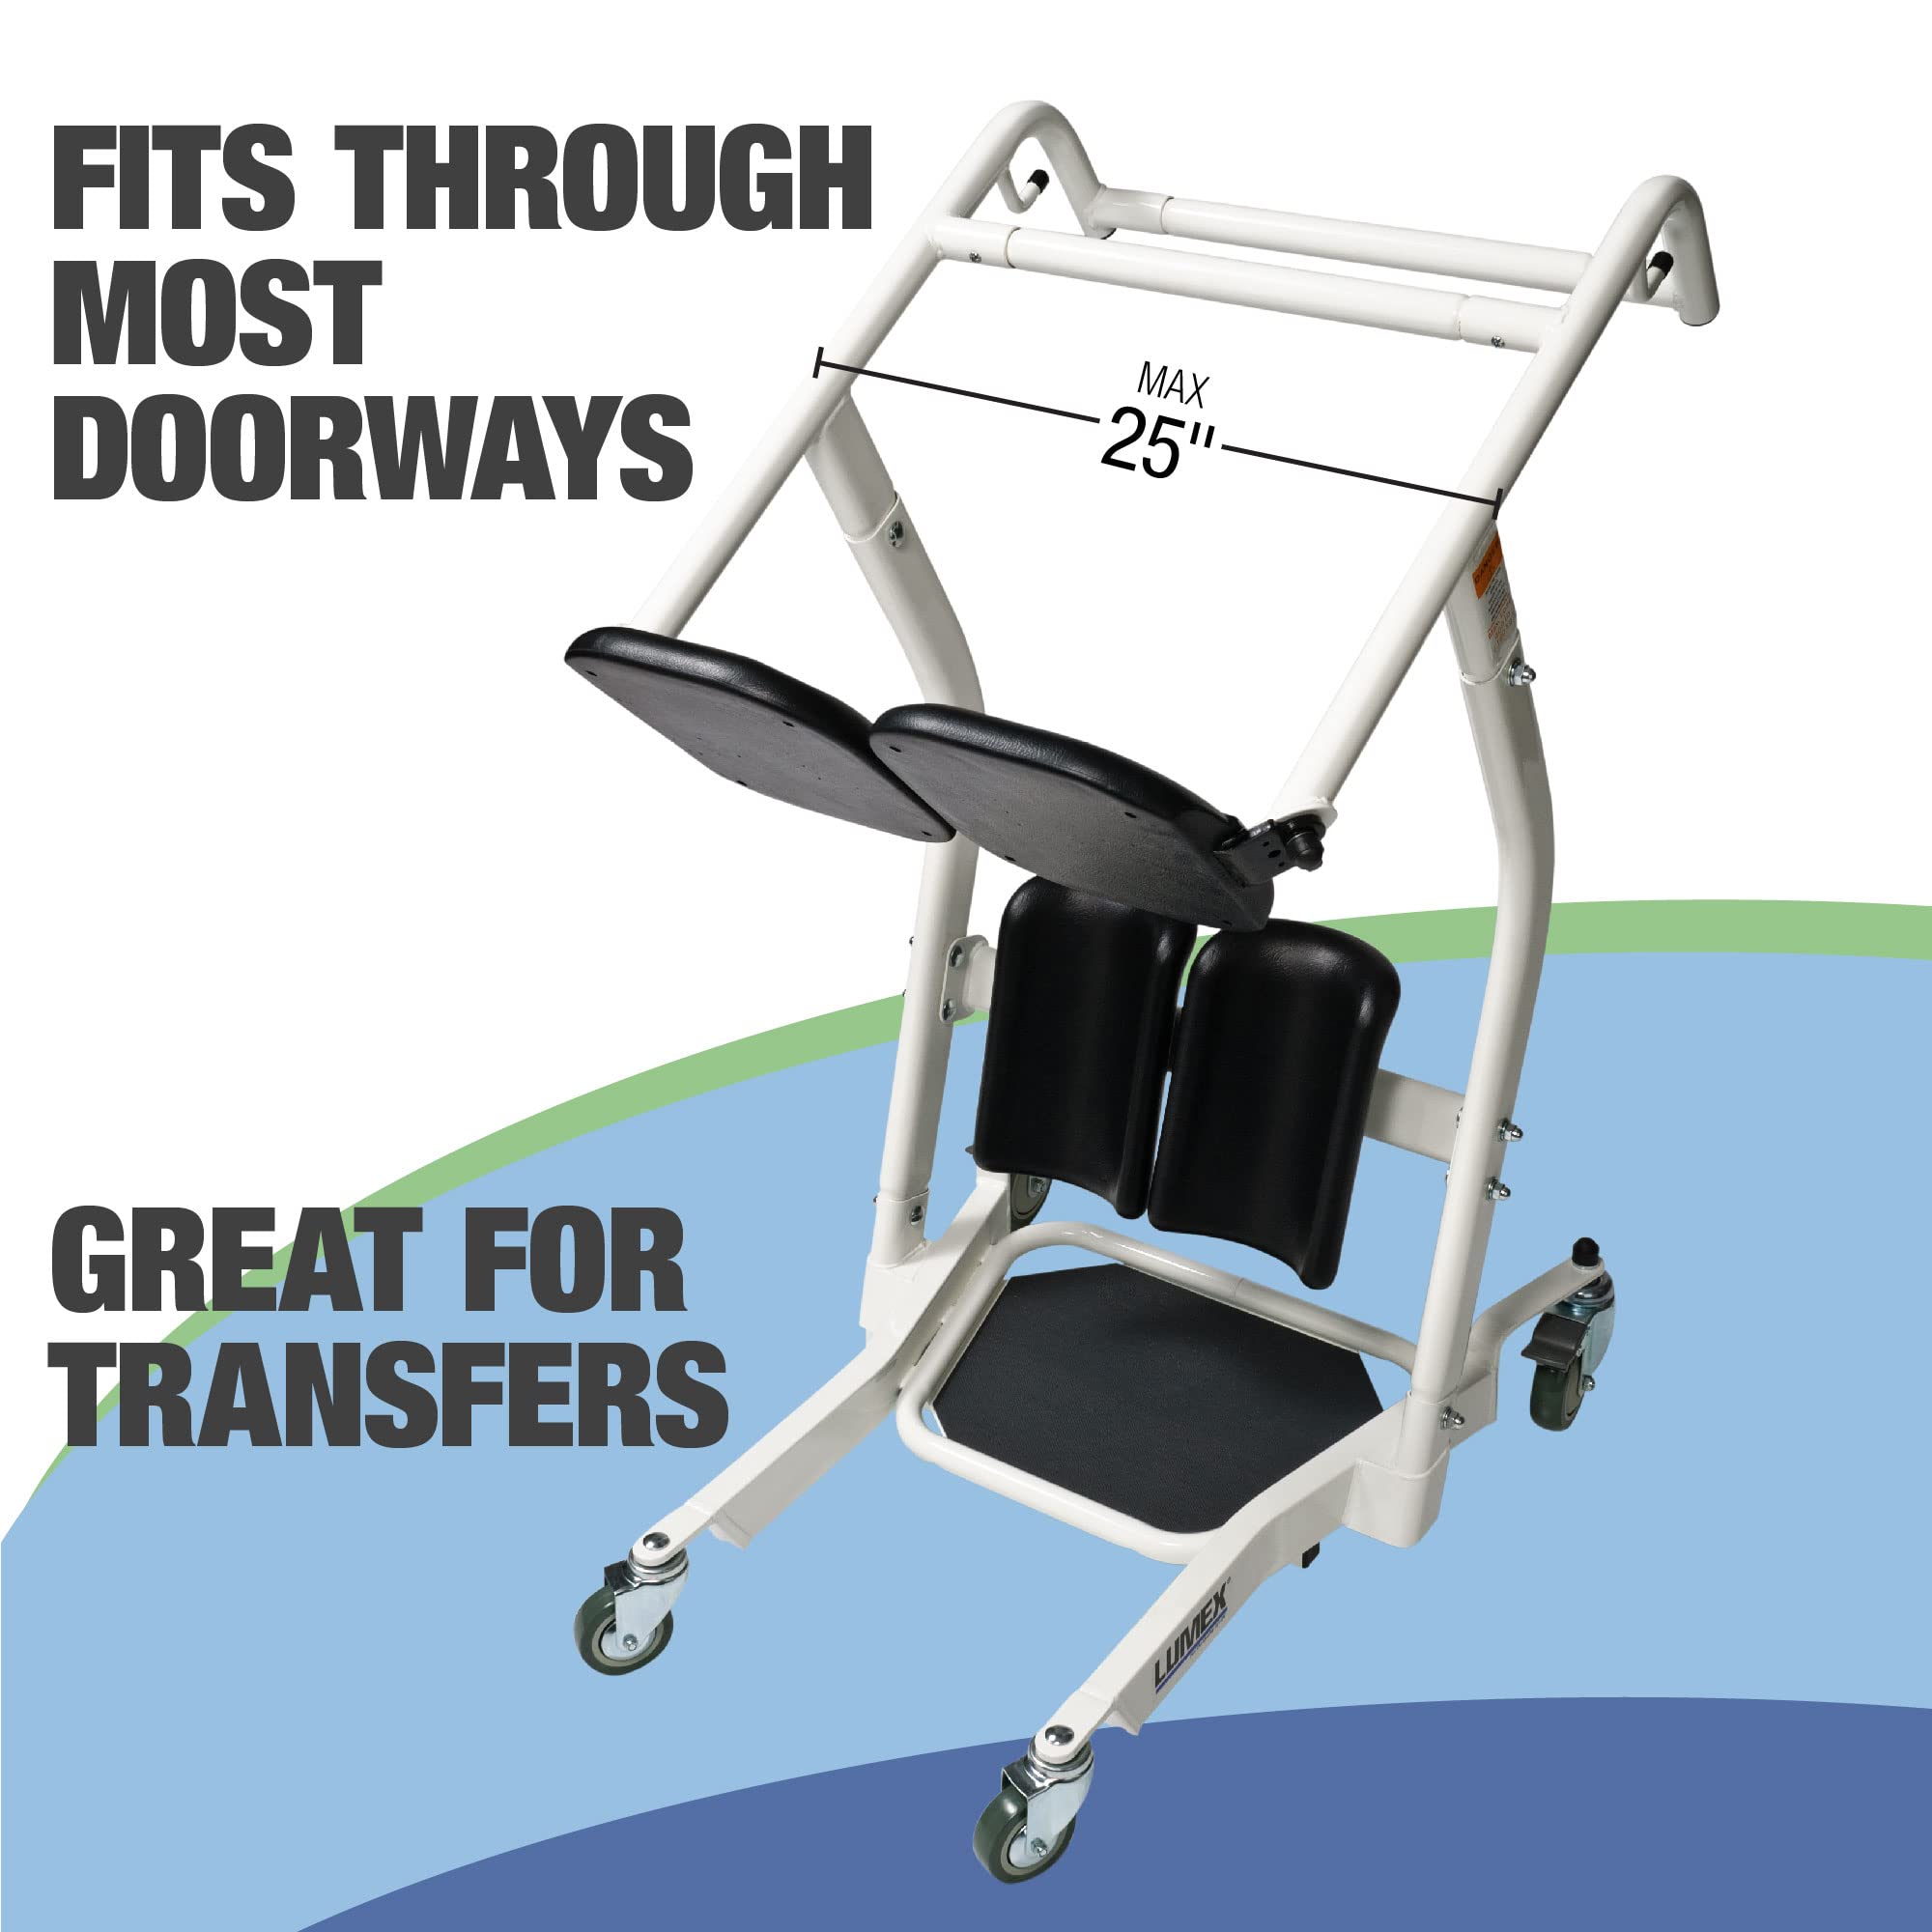 Lumex Stand Assist Patient Lift - Safely Sit, Stand, Transfer & Transport - LF1600